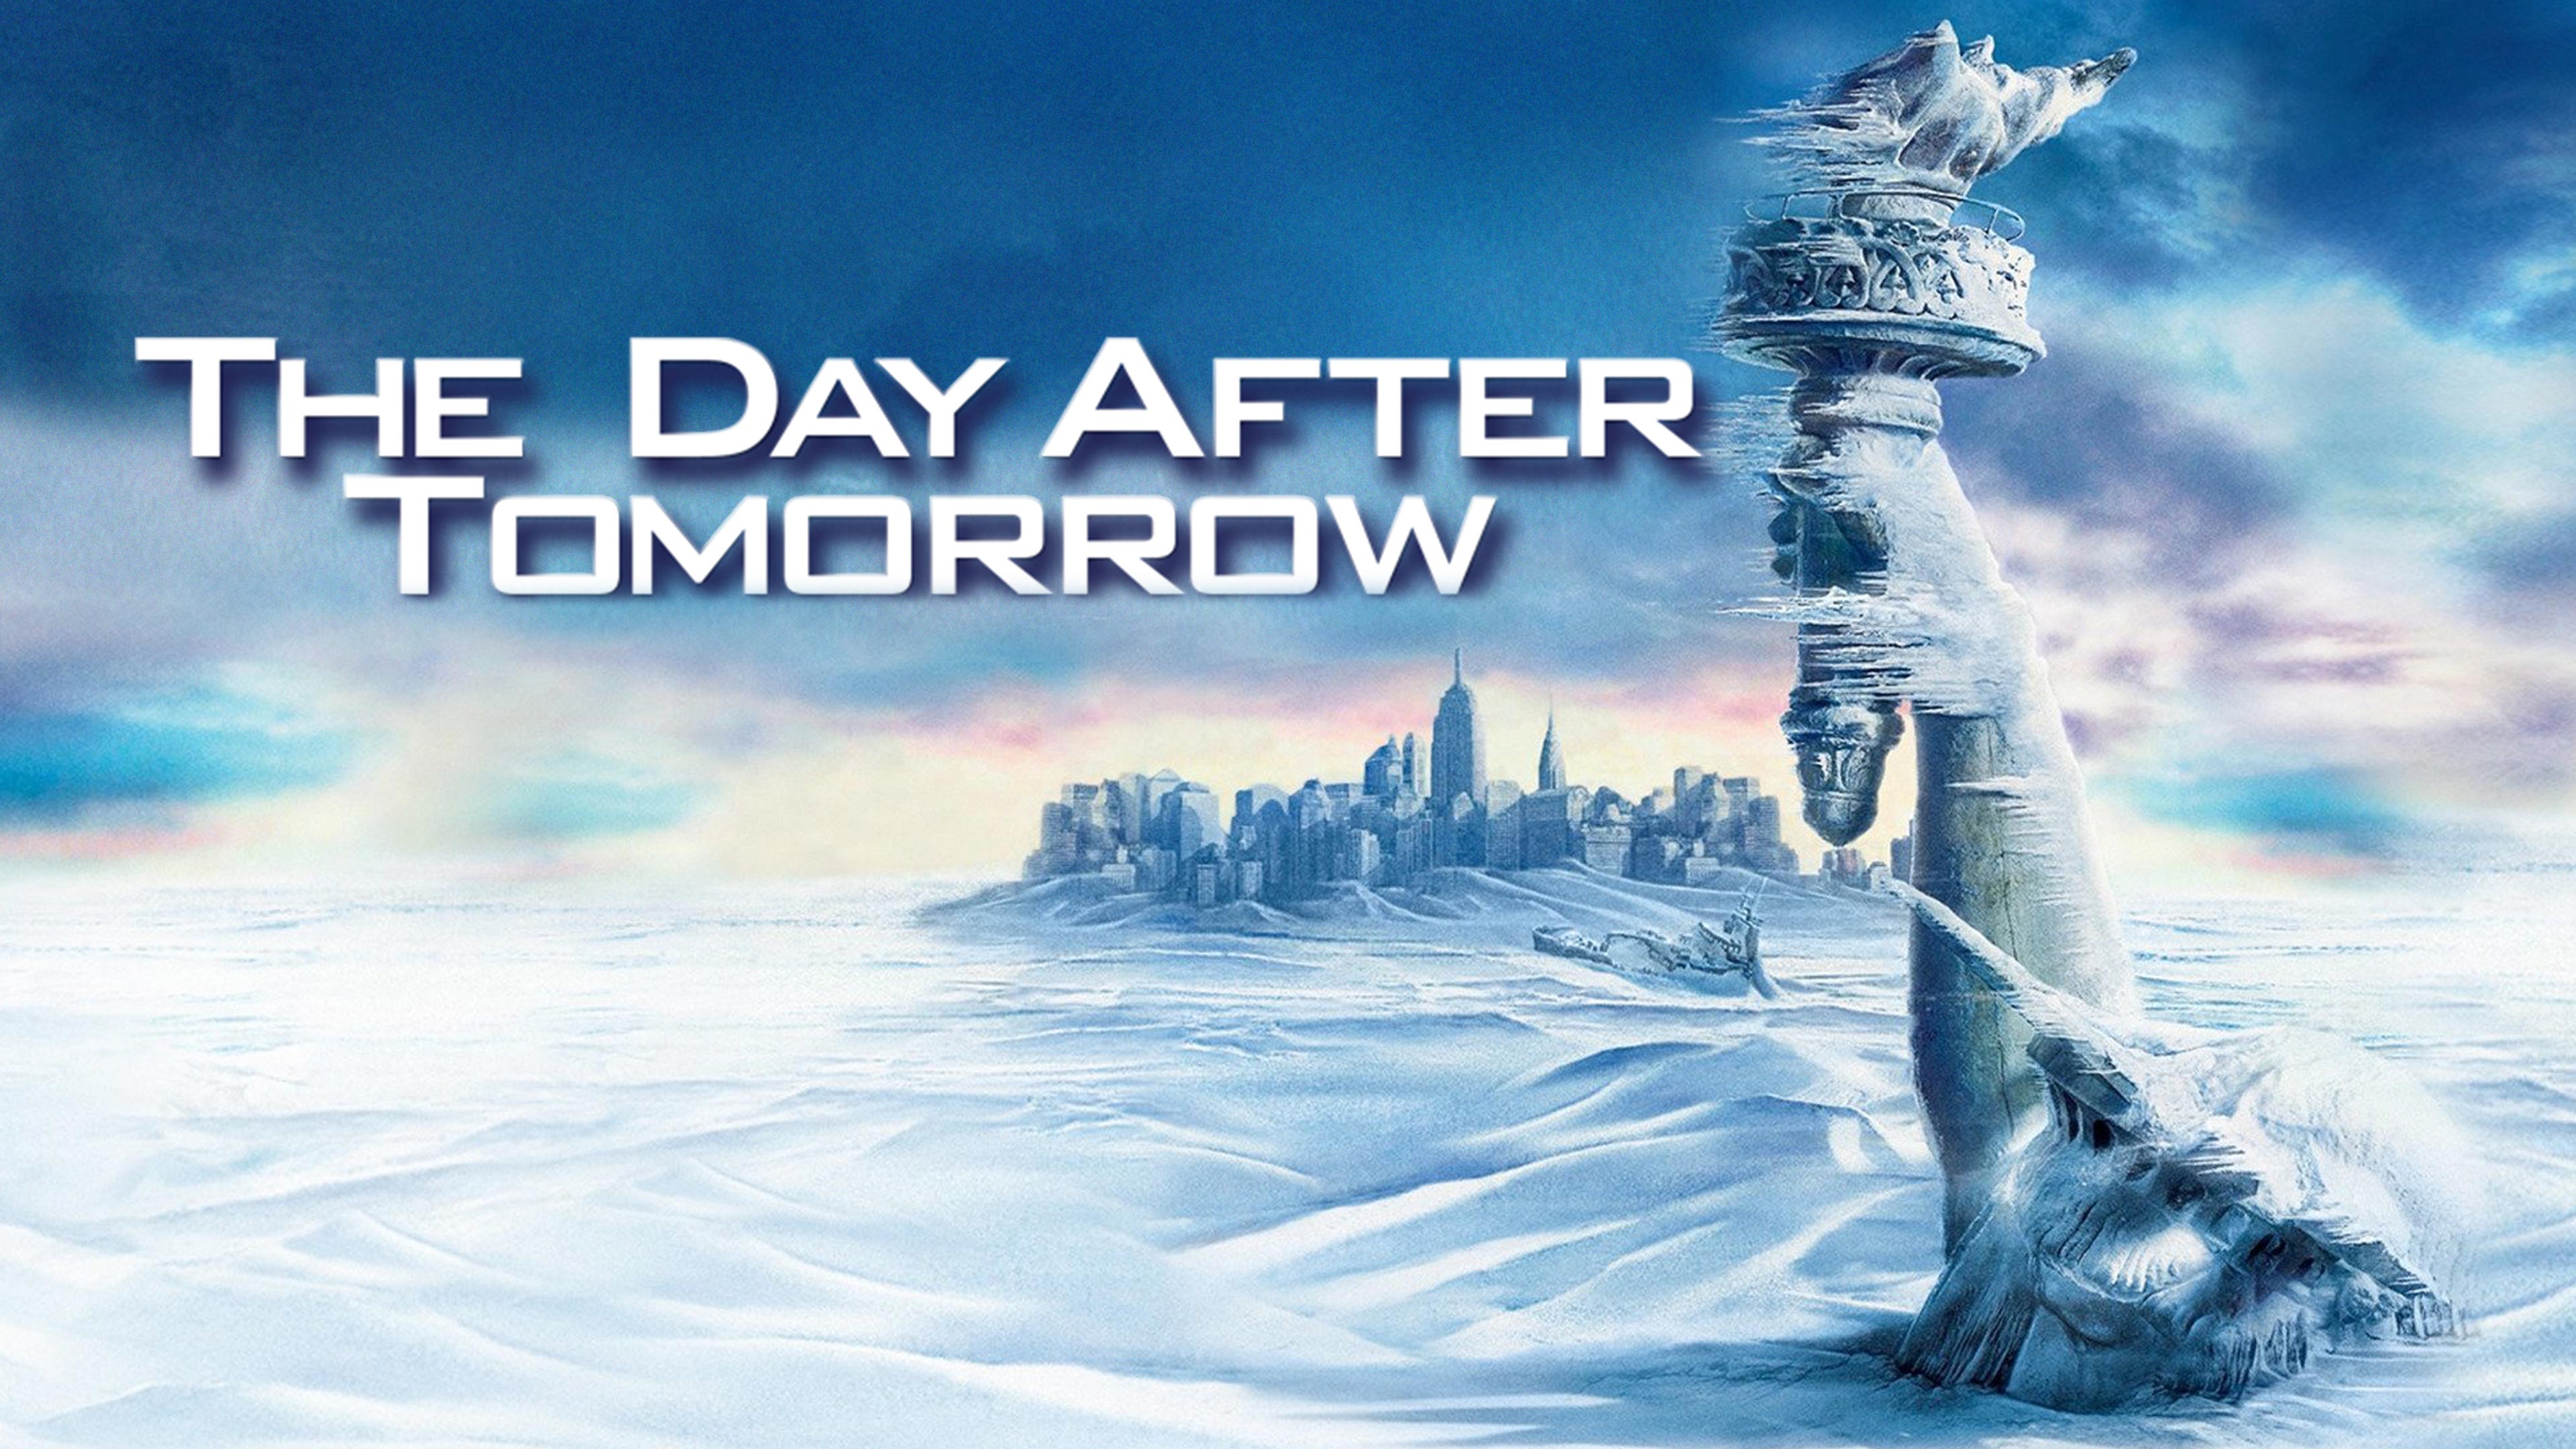 Watch The Day After Tomorrow Online | Stream Full Movies